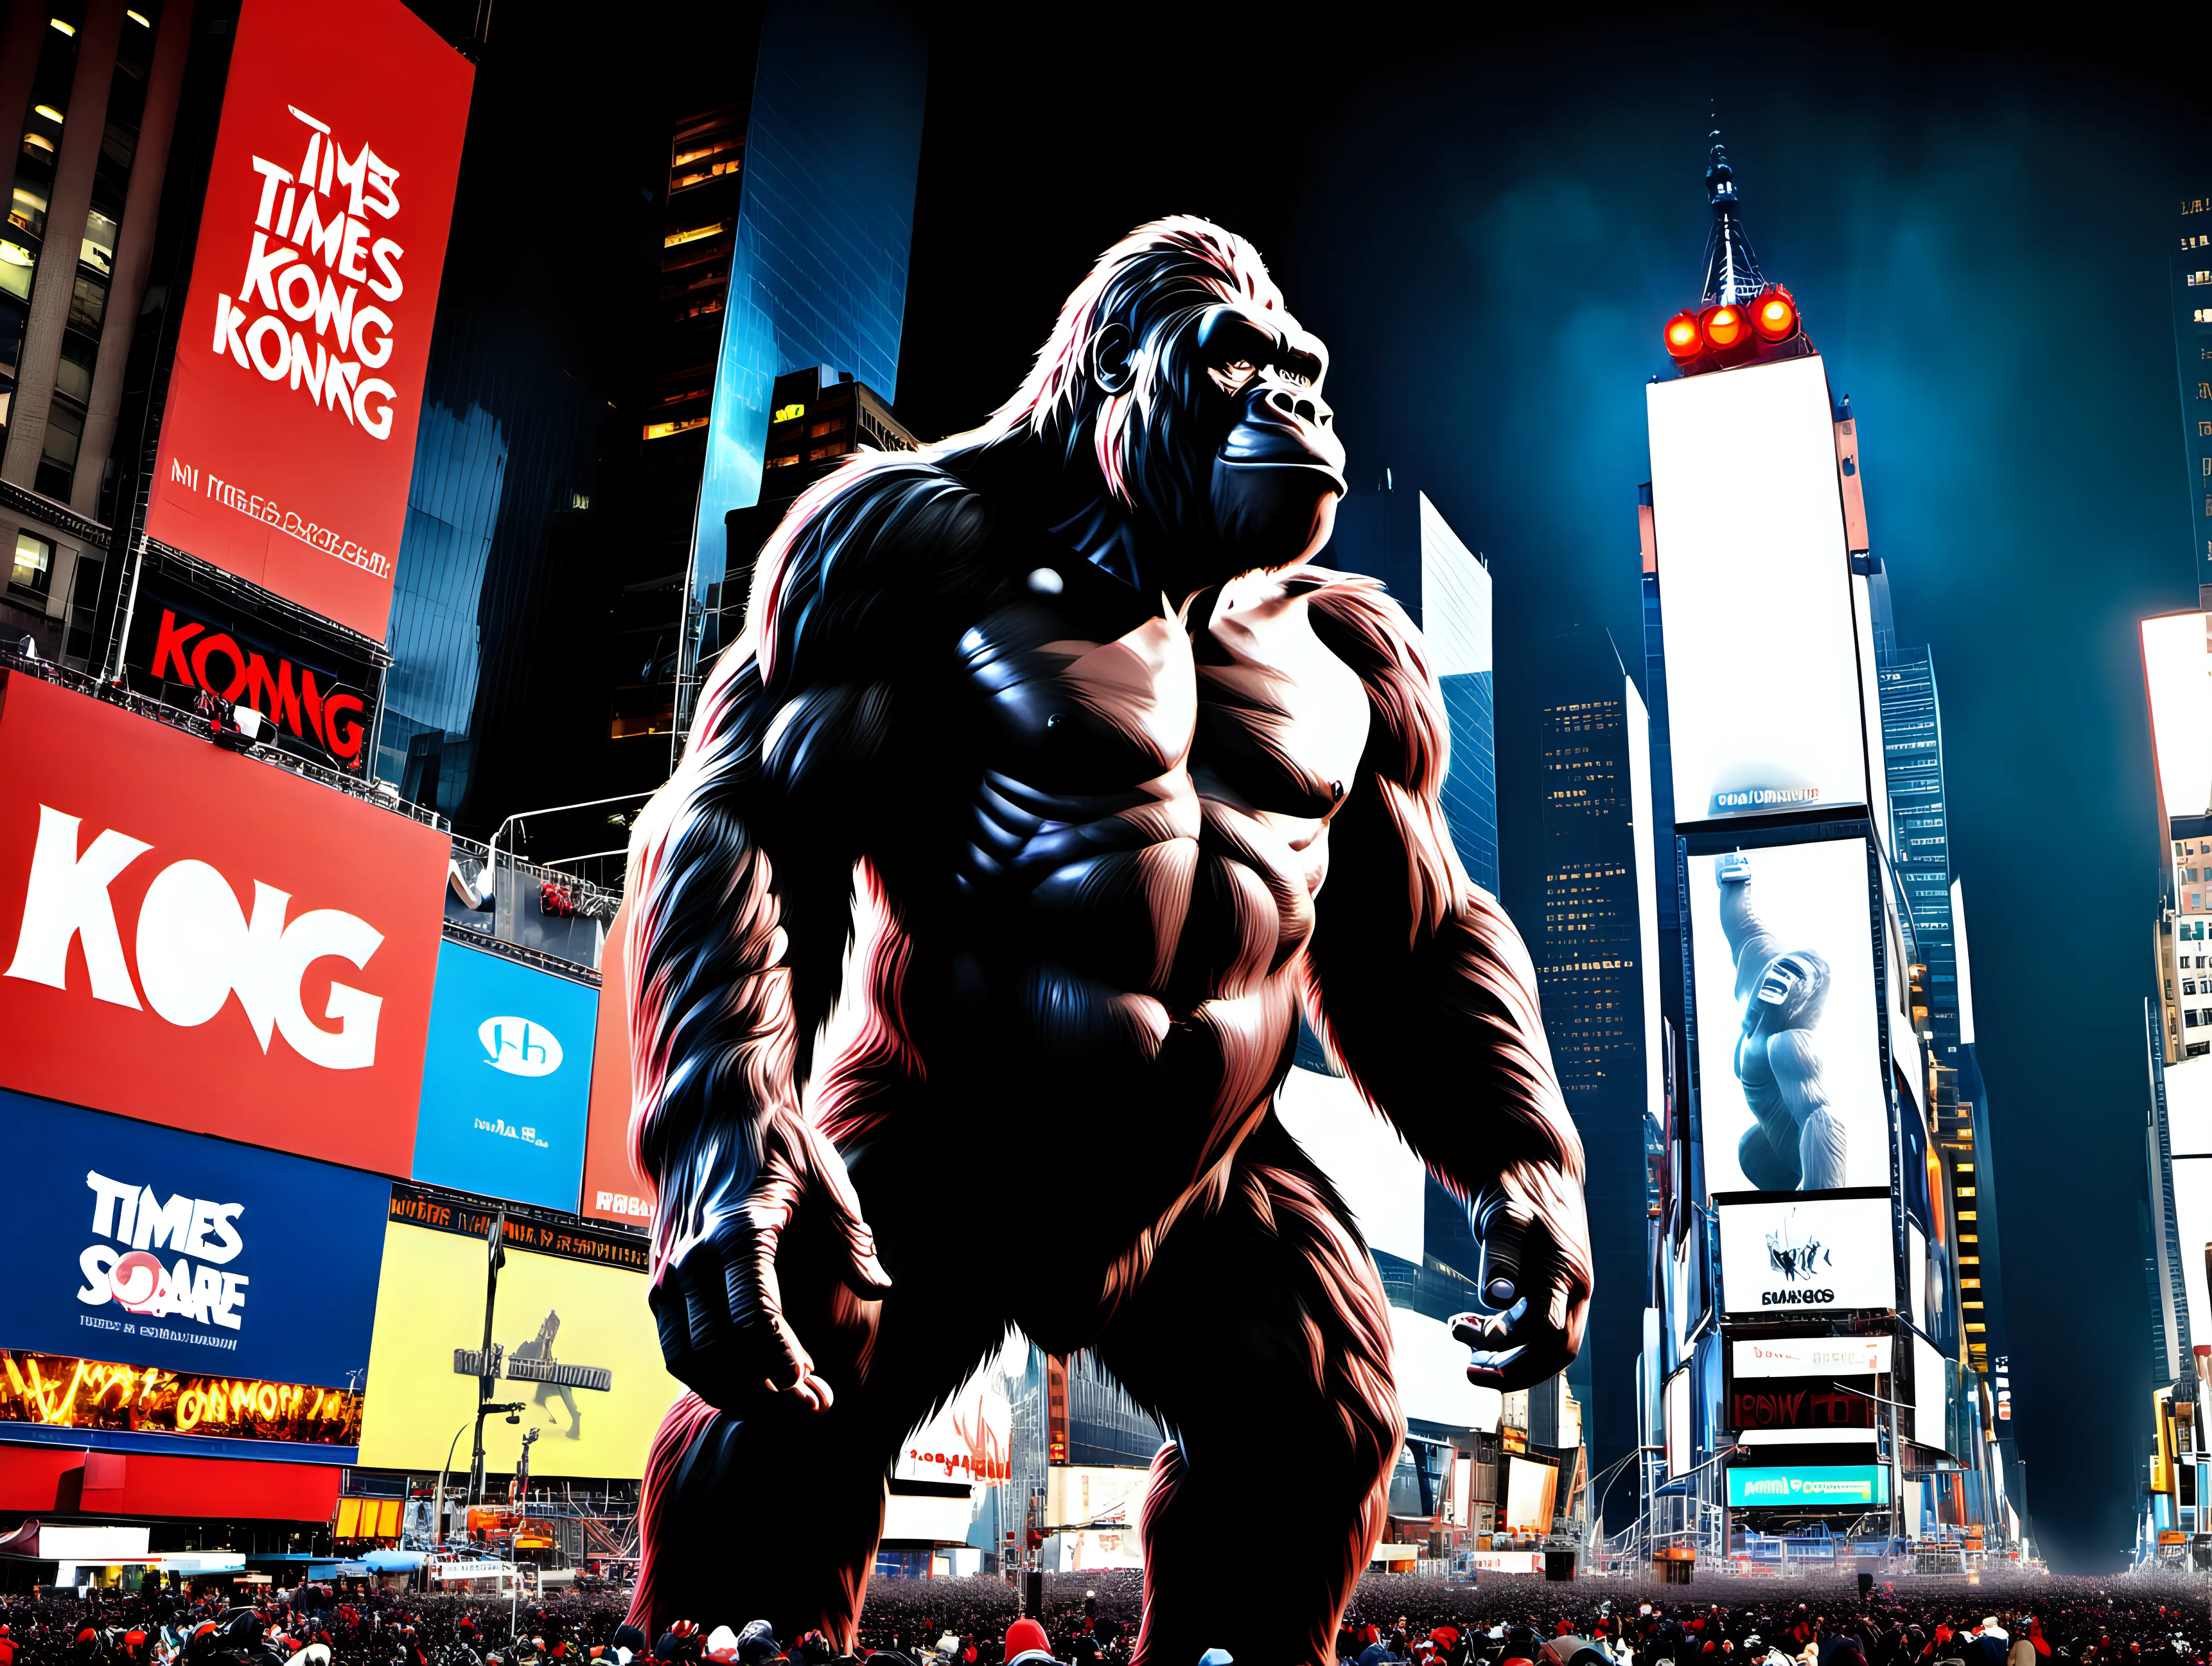 Giant Gorilla Dominates Times Square on New Years Eve